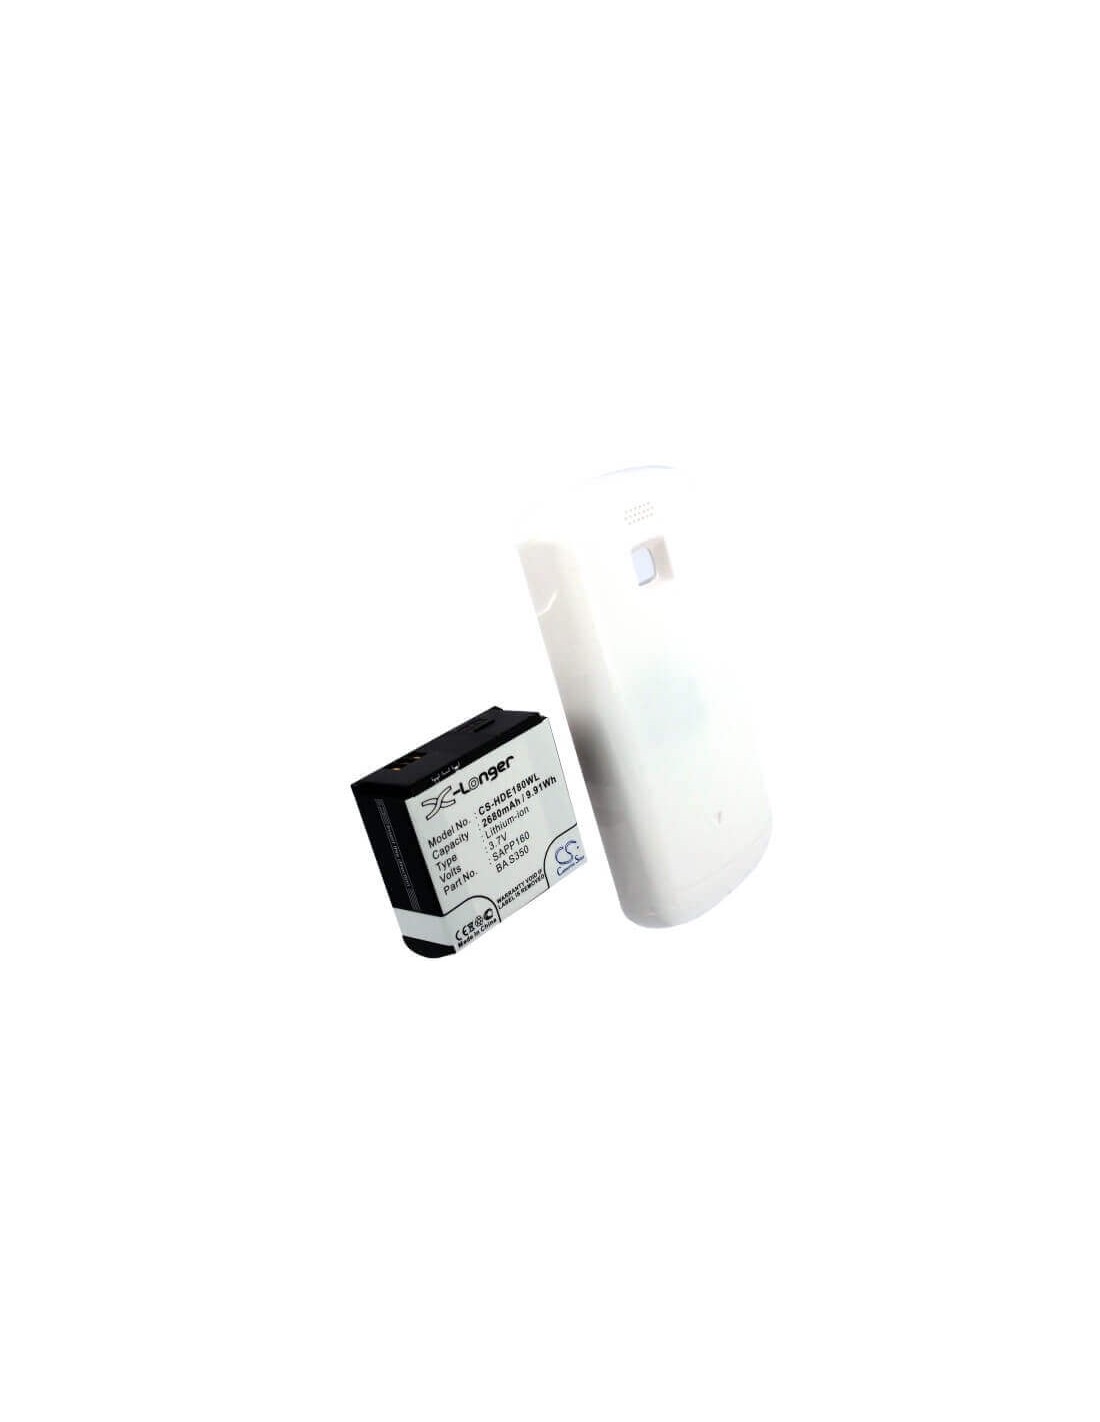 Battery for HTC Magic, A6161, Sapphire, white back cover 3.7V, 2680mAh - 9.92Wh